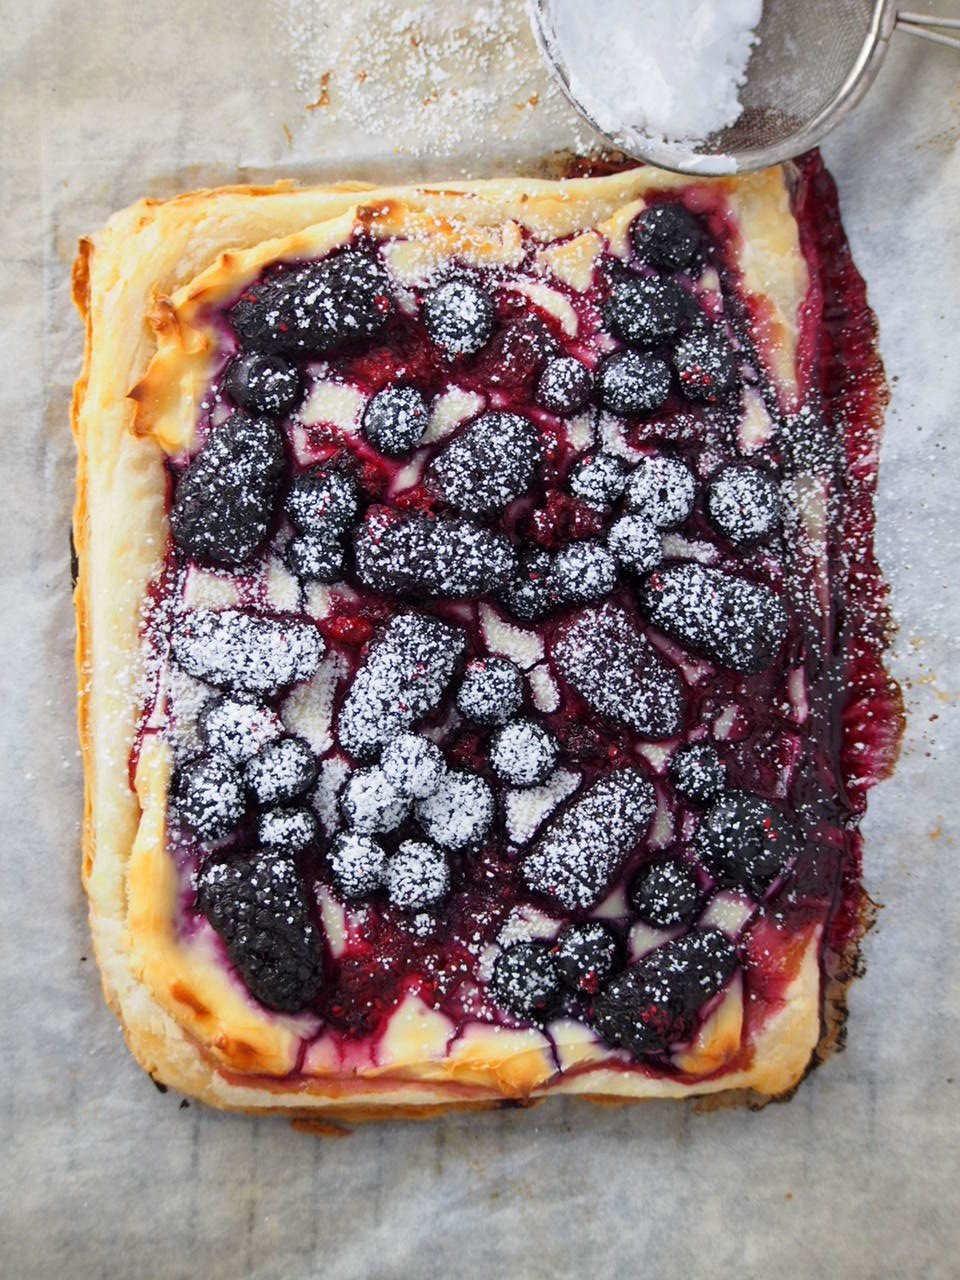 Berry Tart dusted with powdered sugar.